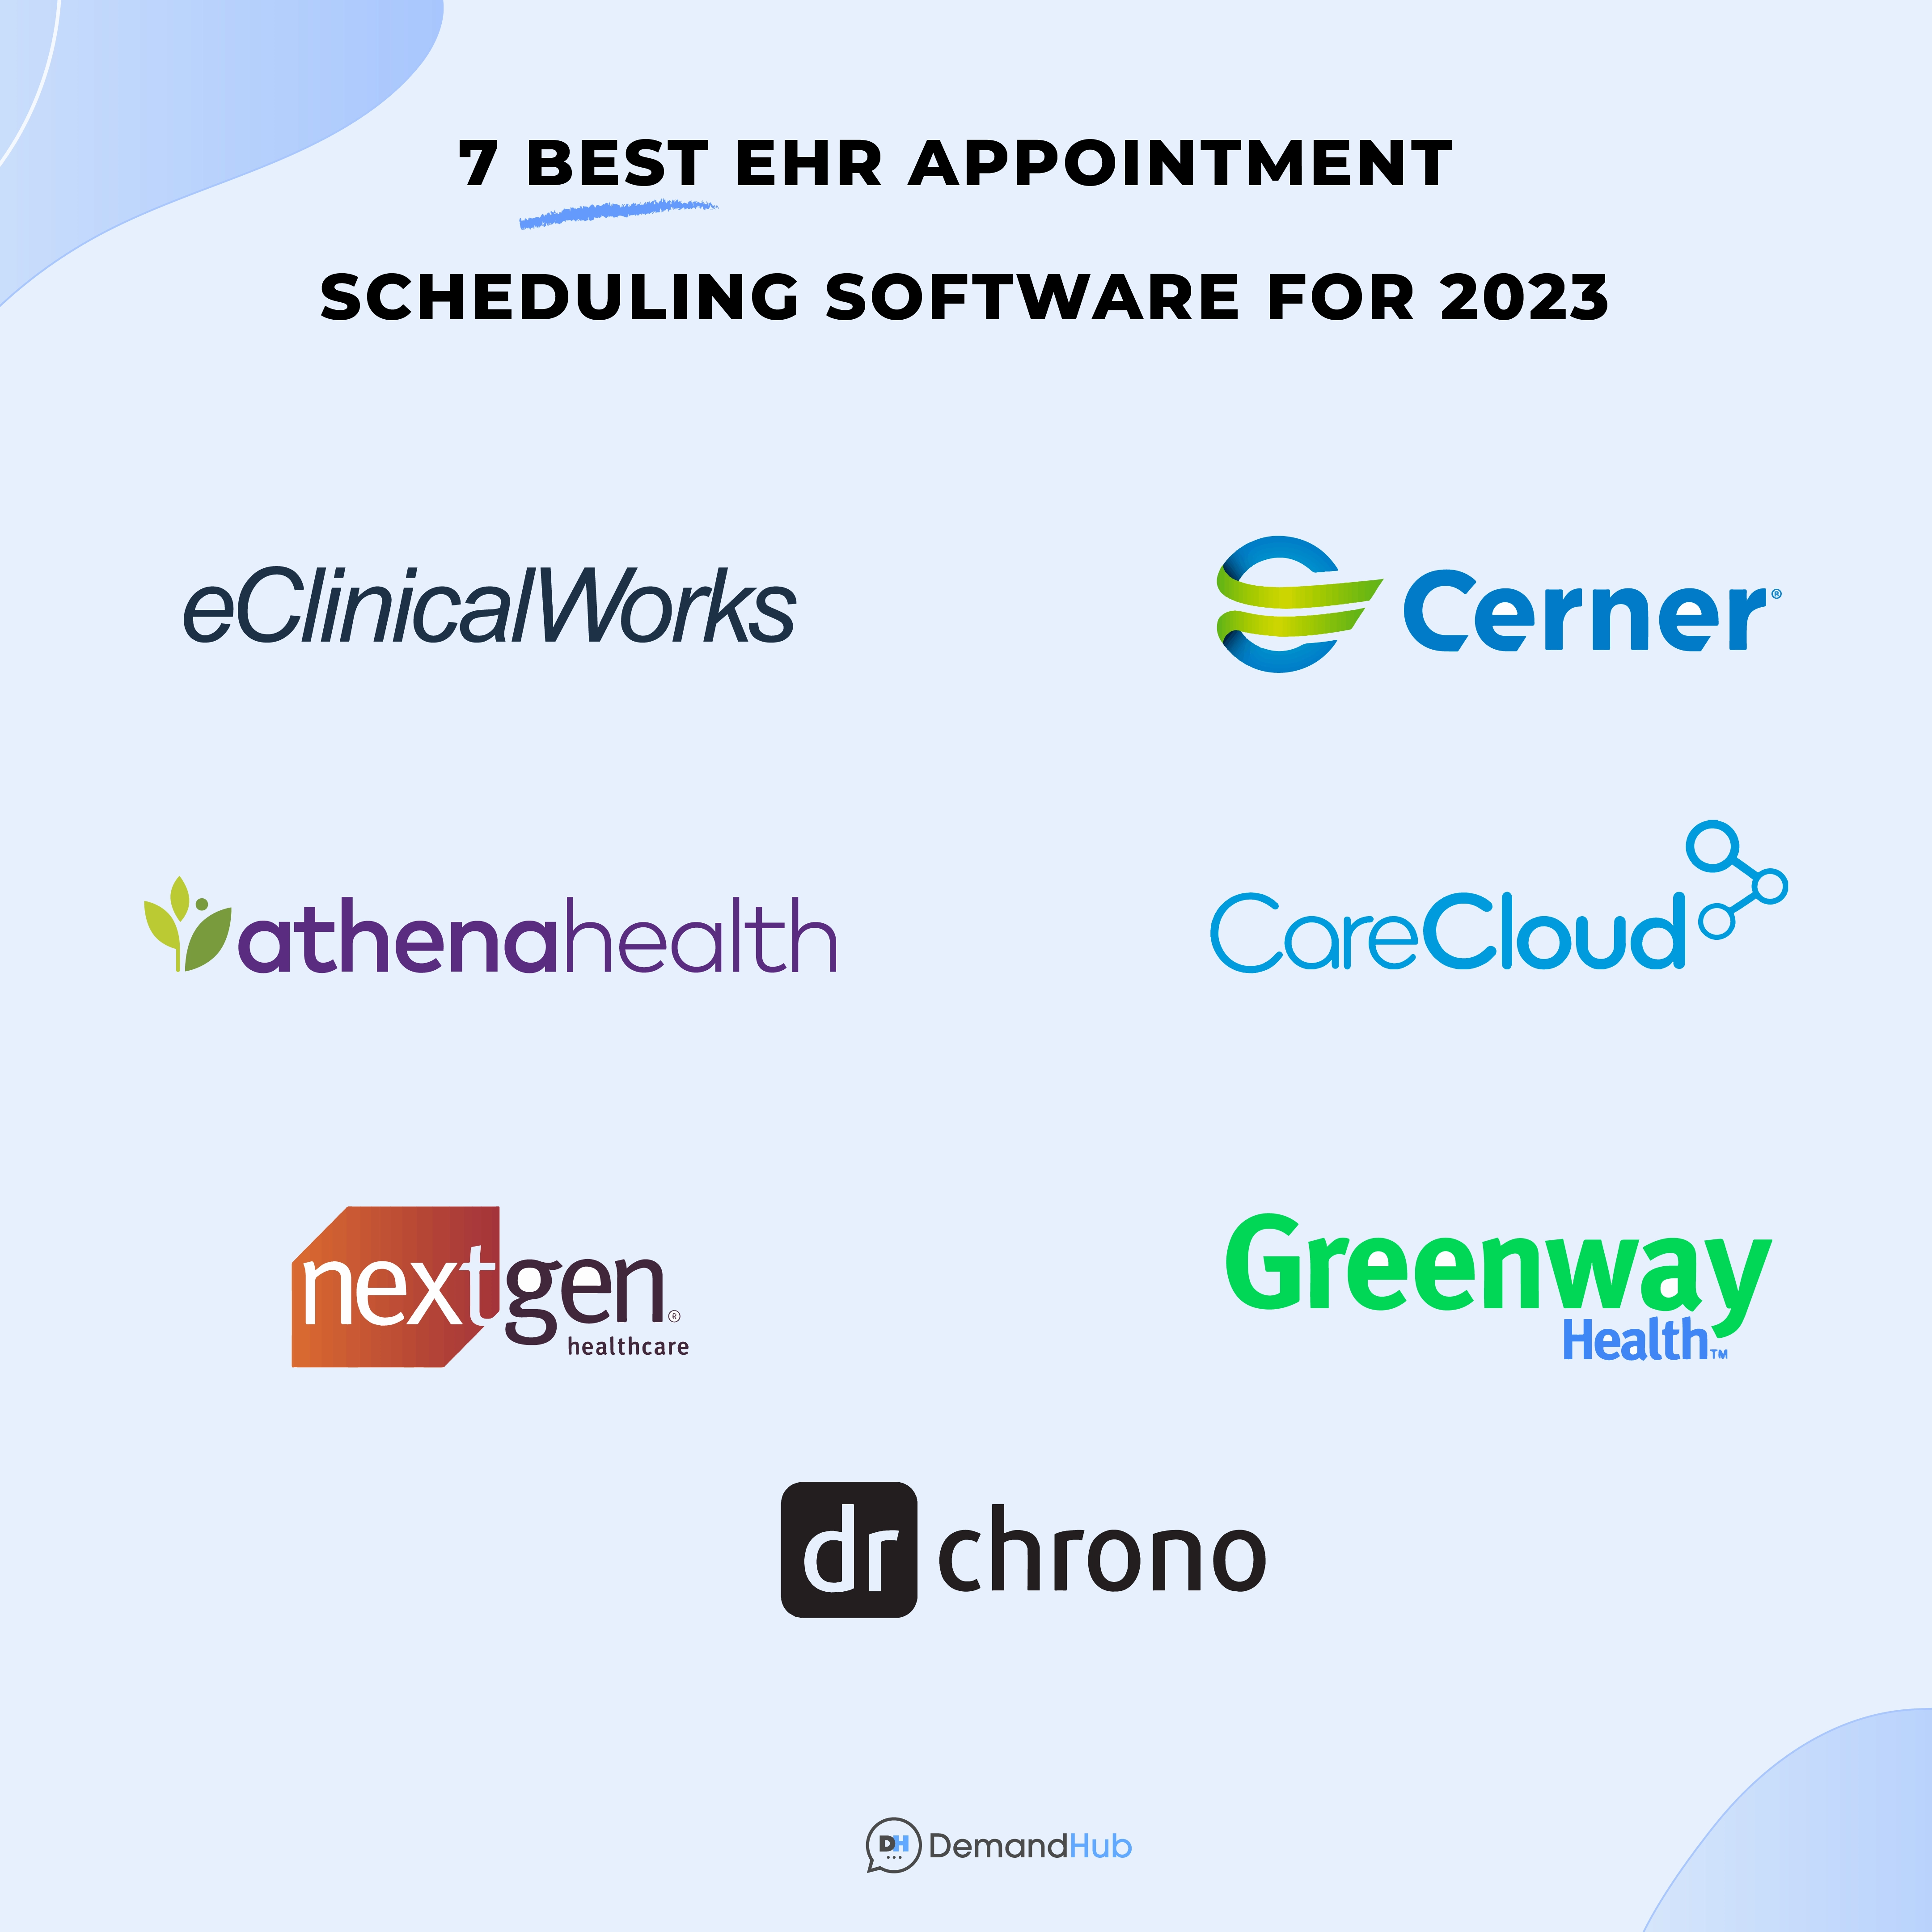 7 Best EHR Appointment Scheduling Softwares for 2023